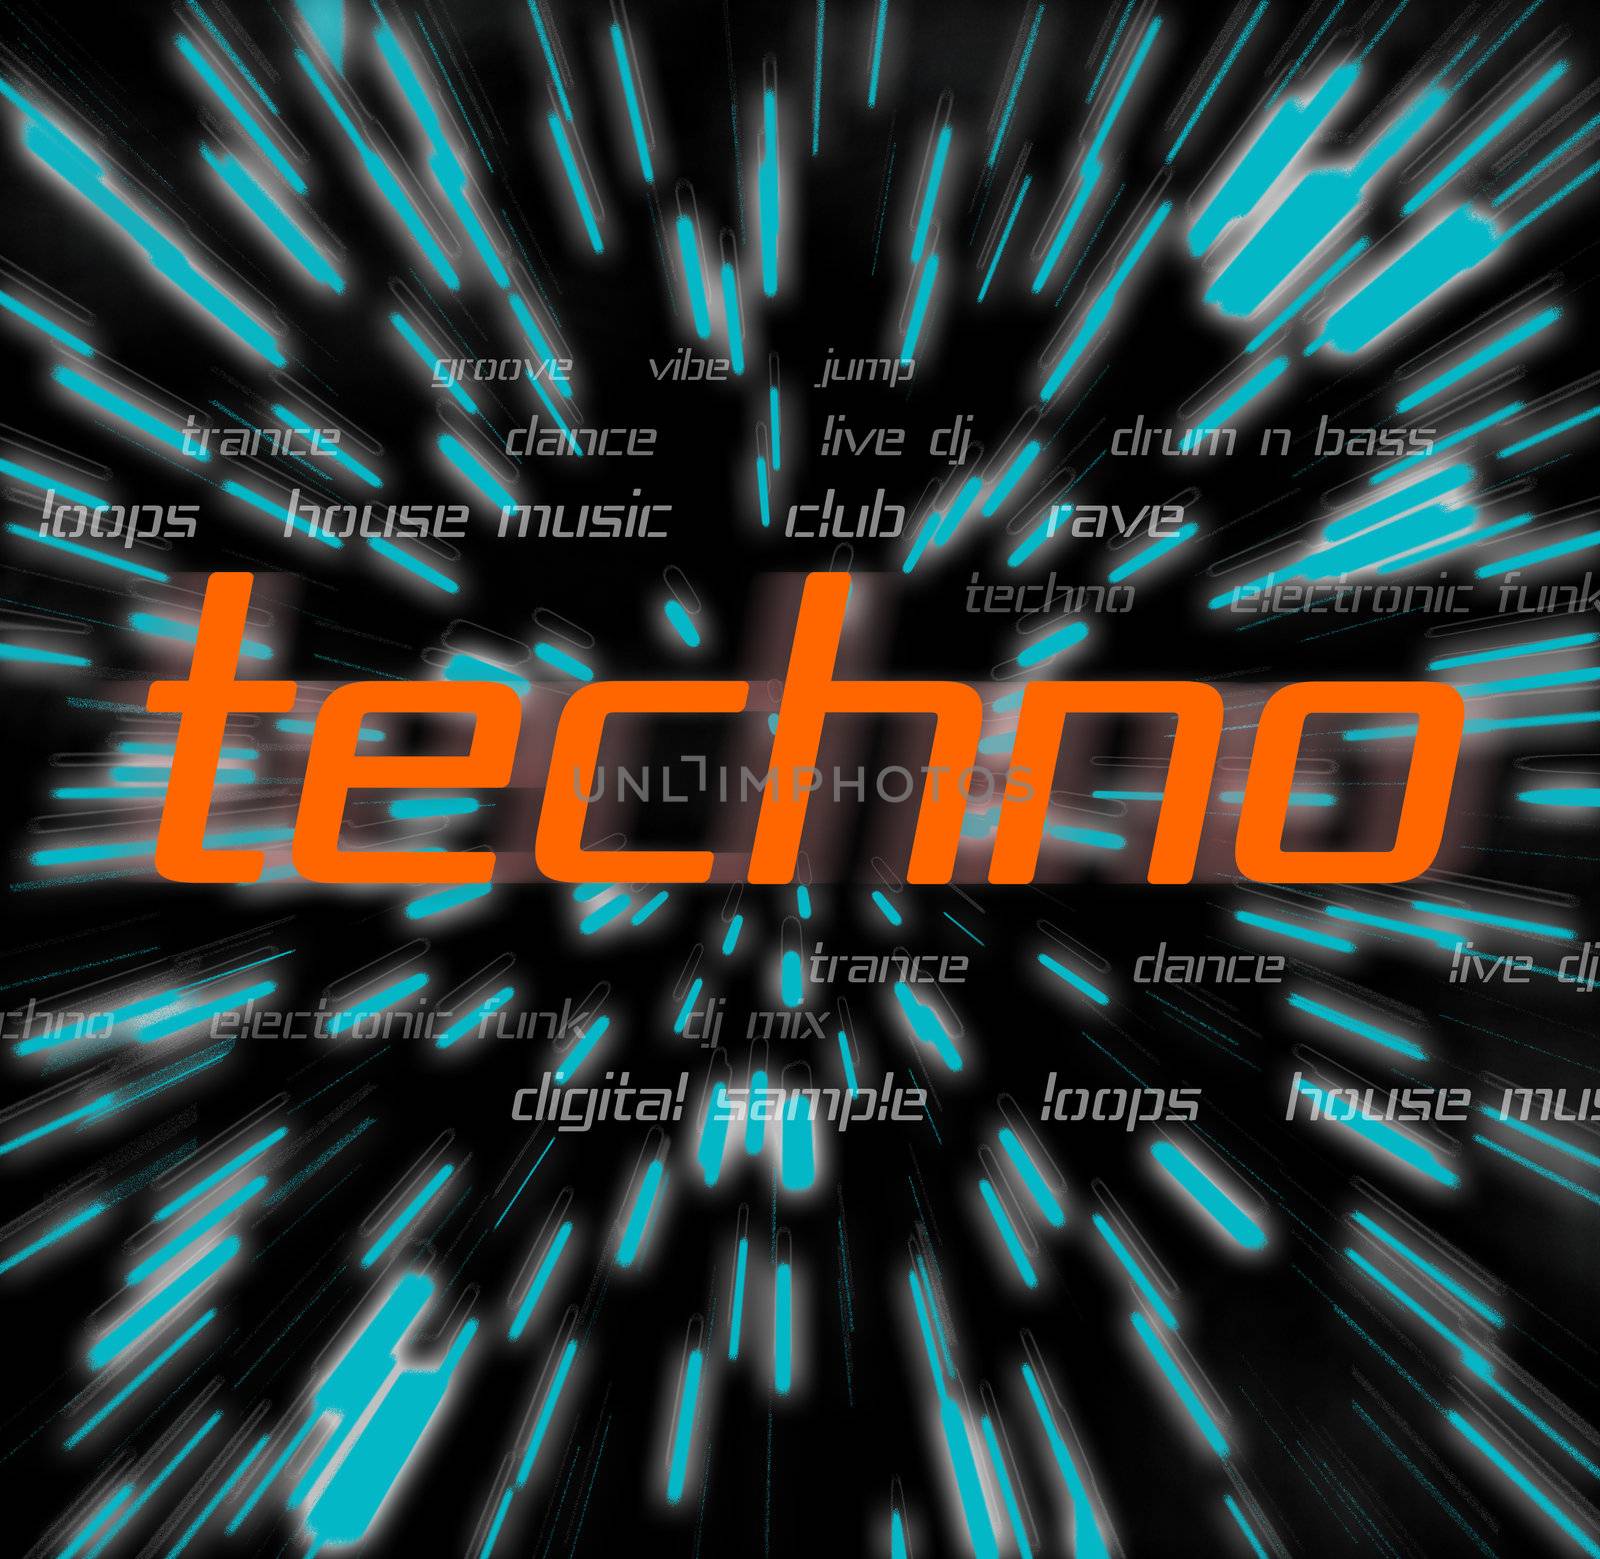 A techno montage with typography and graphics.